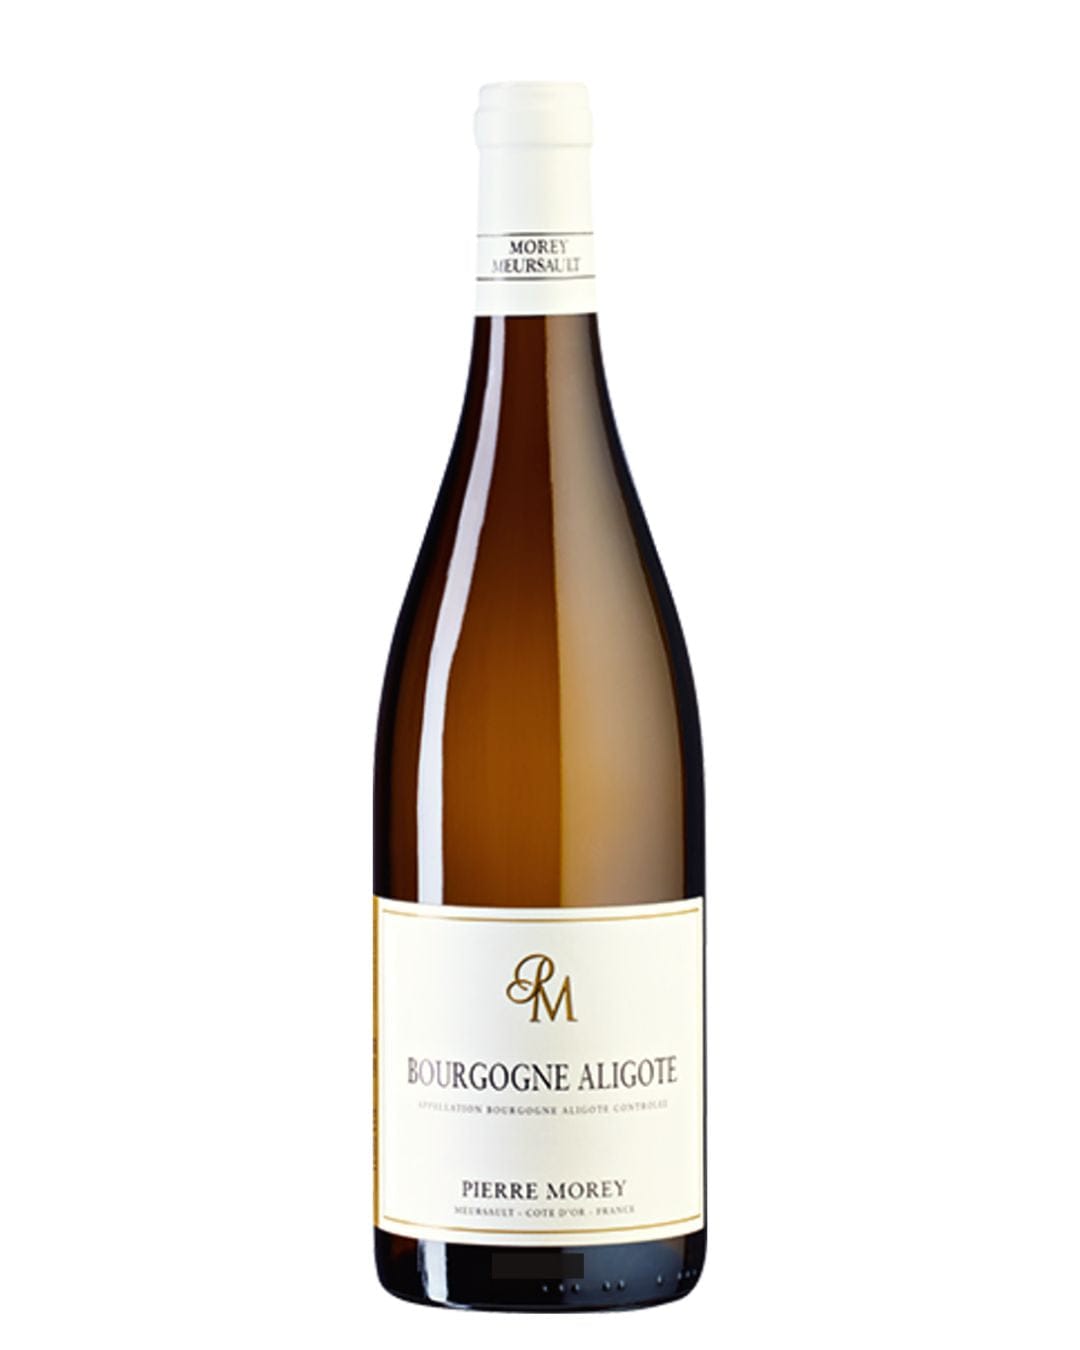 Shop Domaine Pierre Morey Domaine Pierre Morey Bourgogne Aligote 2019 online at PENTICTON artisanal French wine store in Hong Kong. Discover other French wines, promotions, workshops and featured offers at pentictonpacific.com 